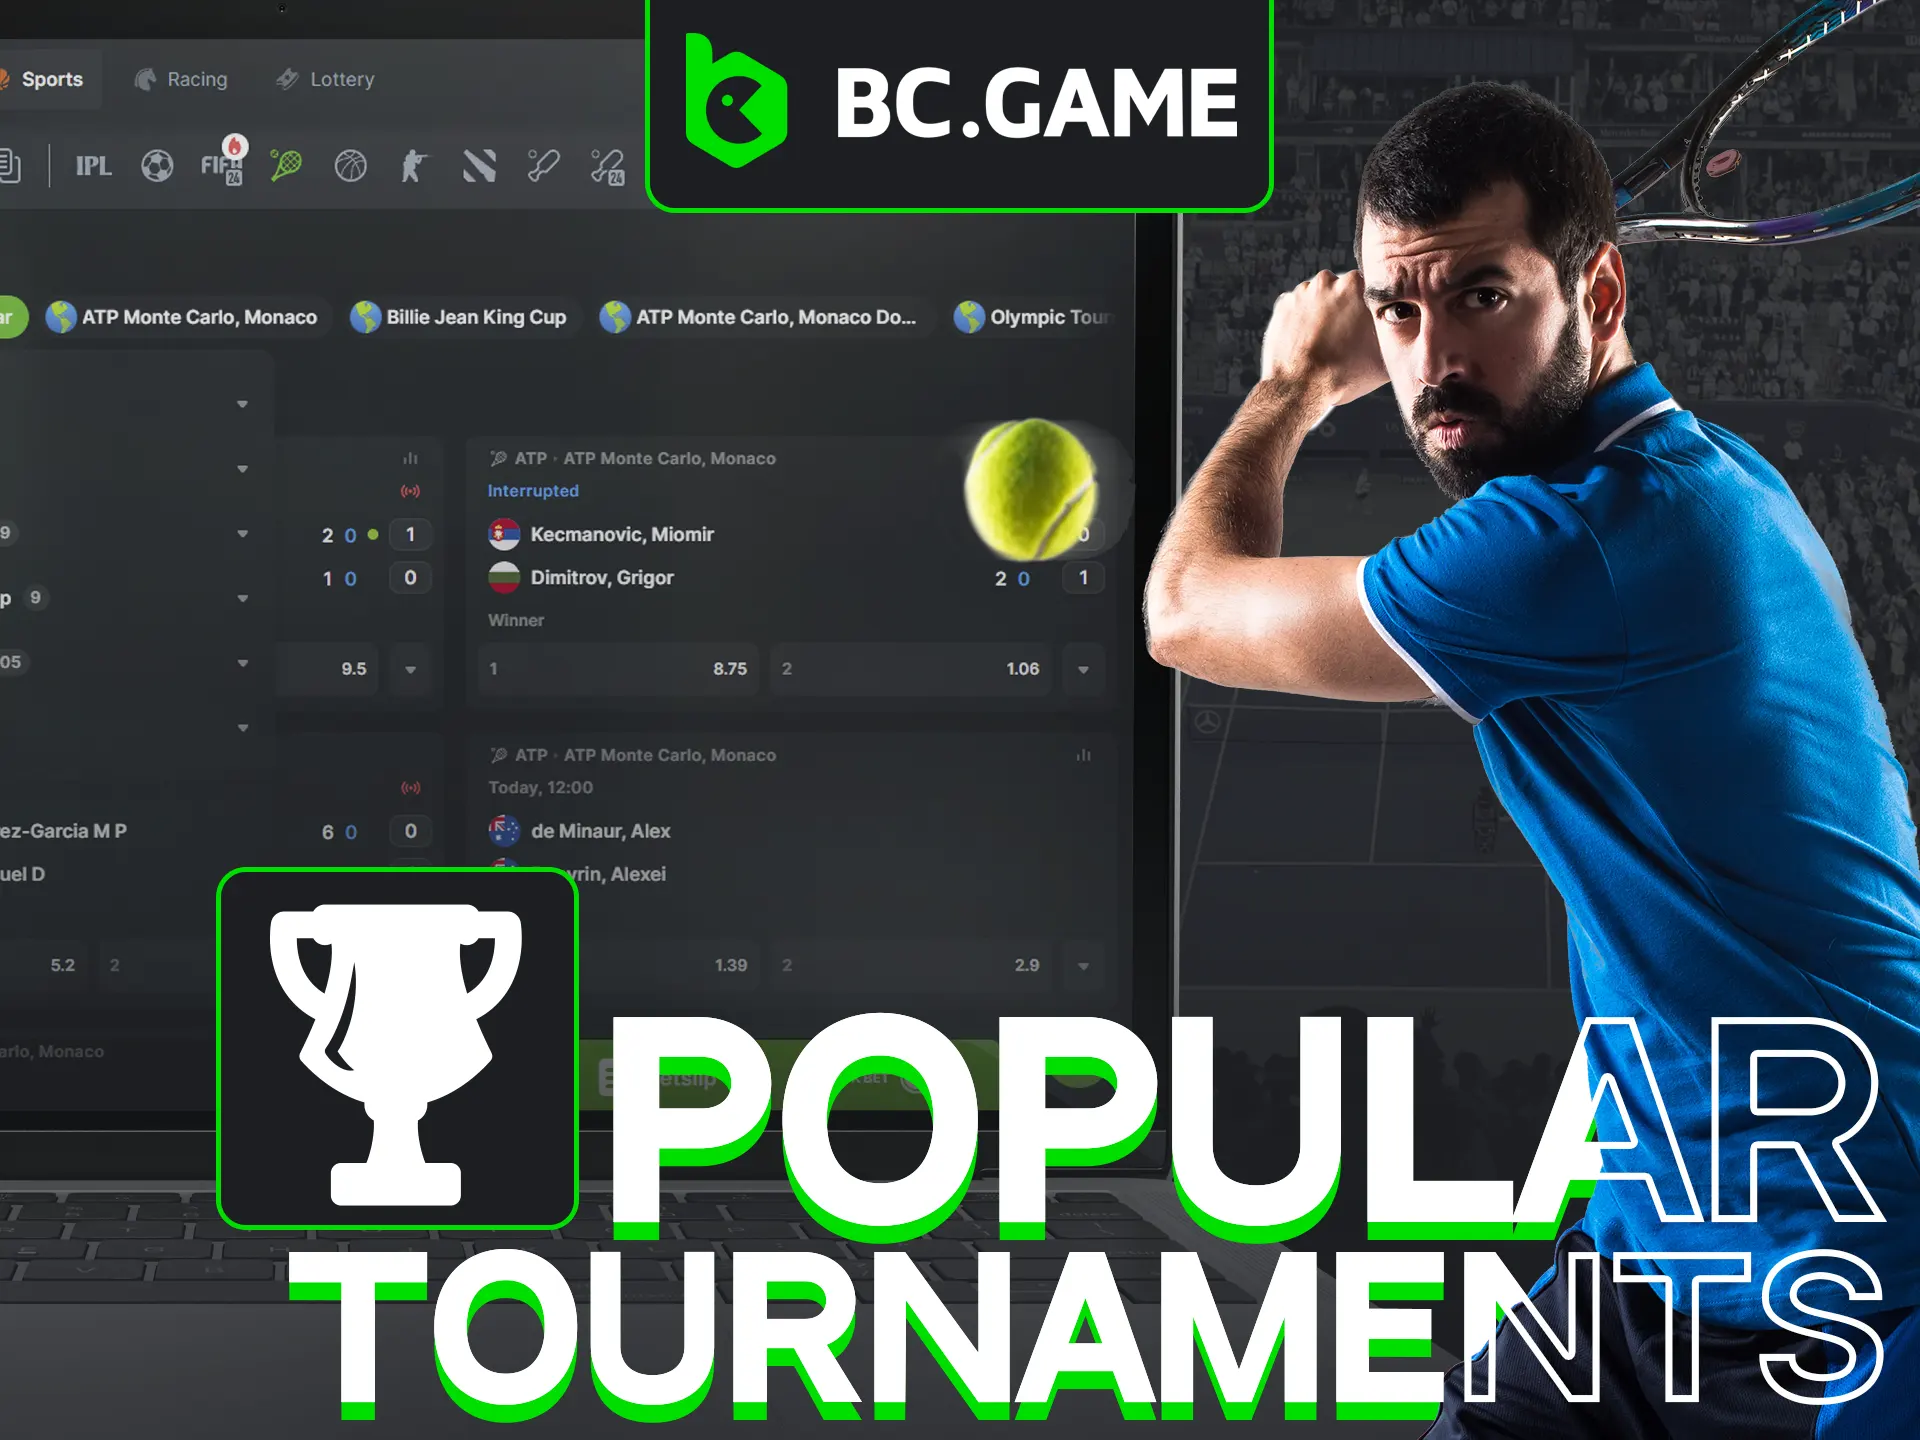 At BC Game, find all major tennis tournaments easily.